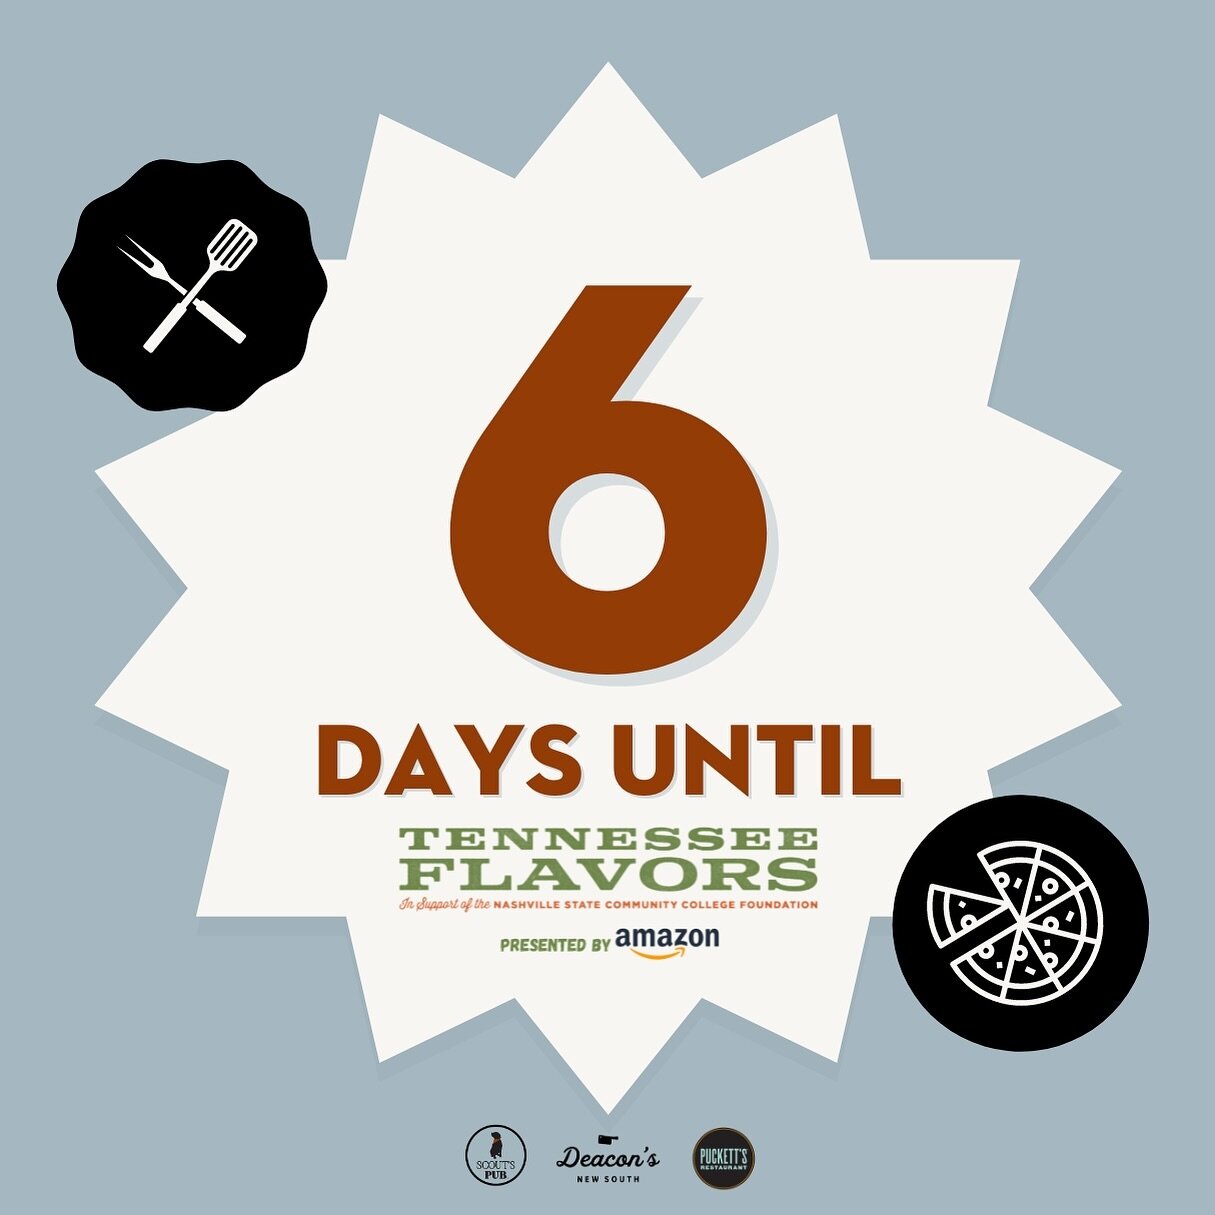 🍴✨ Indulge in an unforgettable culinary experience at Tennessee Flavors! 🎟️ There&rsquo;s just 6 days left until an evening of tantalizing tastes featuring your favorites from Puckett&rsquo;s, Deacon&rsquo;s New South, Scout&rsquo;s Pub, and many m